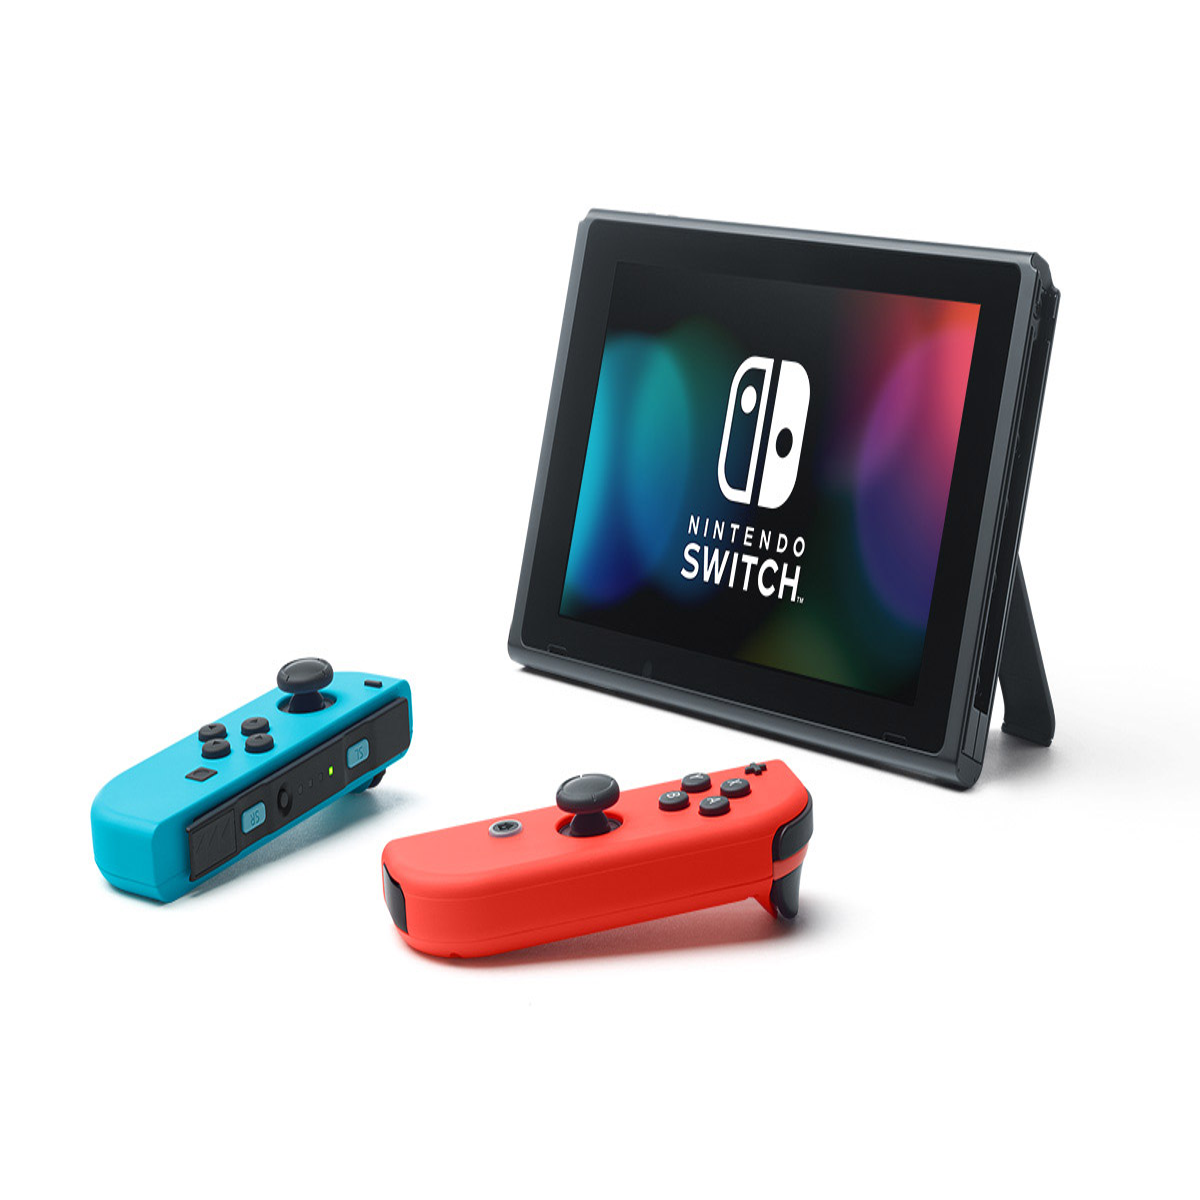 Get a Nintendo Switch at its cheapest price so far - £255 using a code